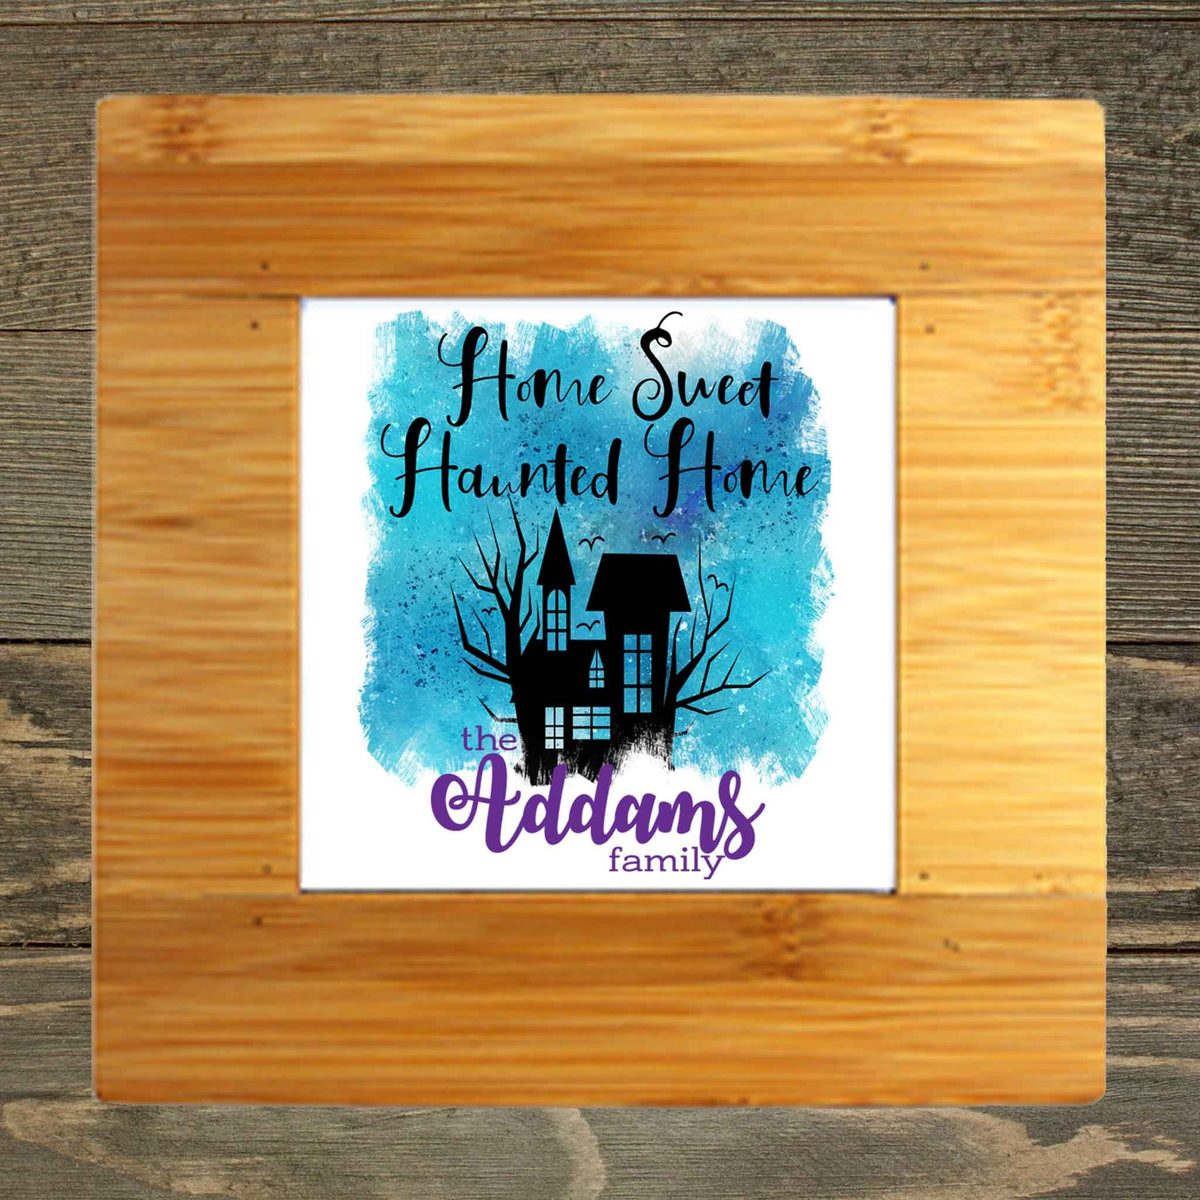 Personalized Iron Trivet | Custom Kitchen Gifts | Home Sweet Haunted Home